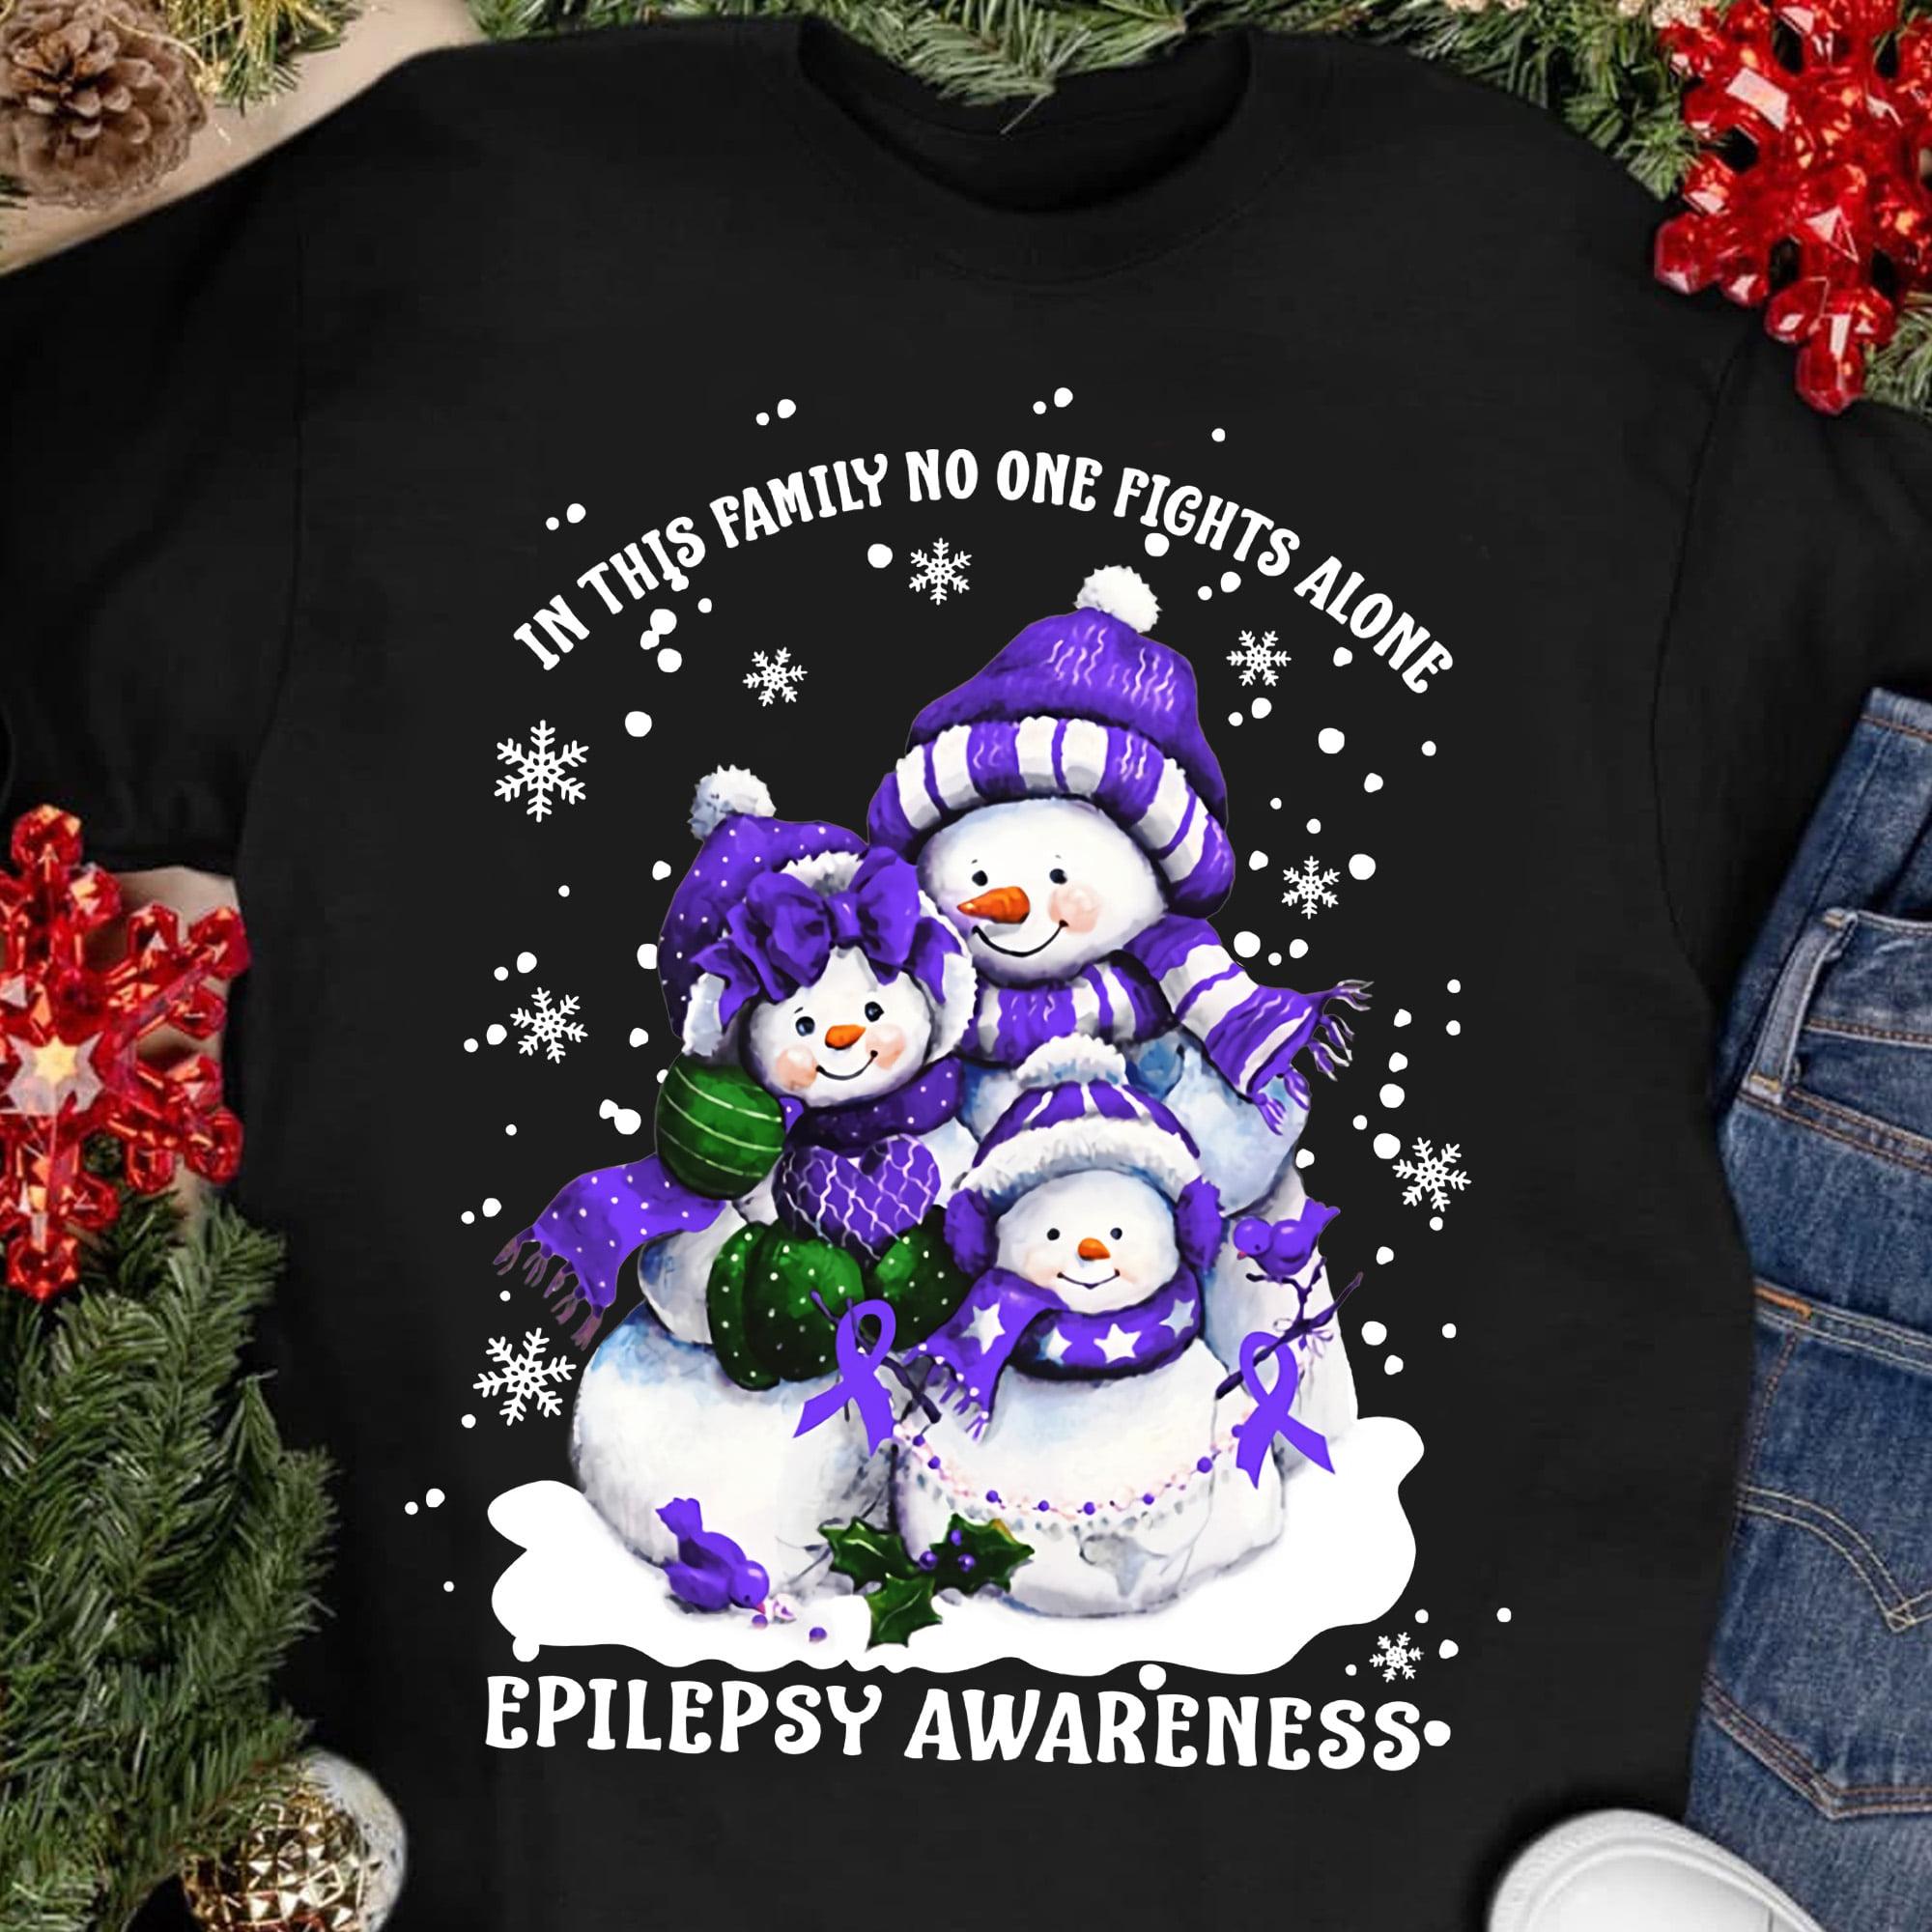 Epilepsy awareness - No one fights alone, Christmas snowman family, gorgeous snowman